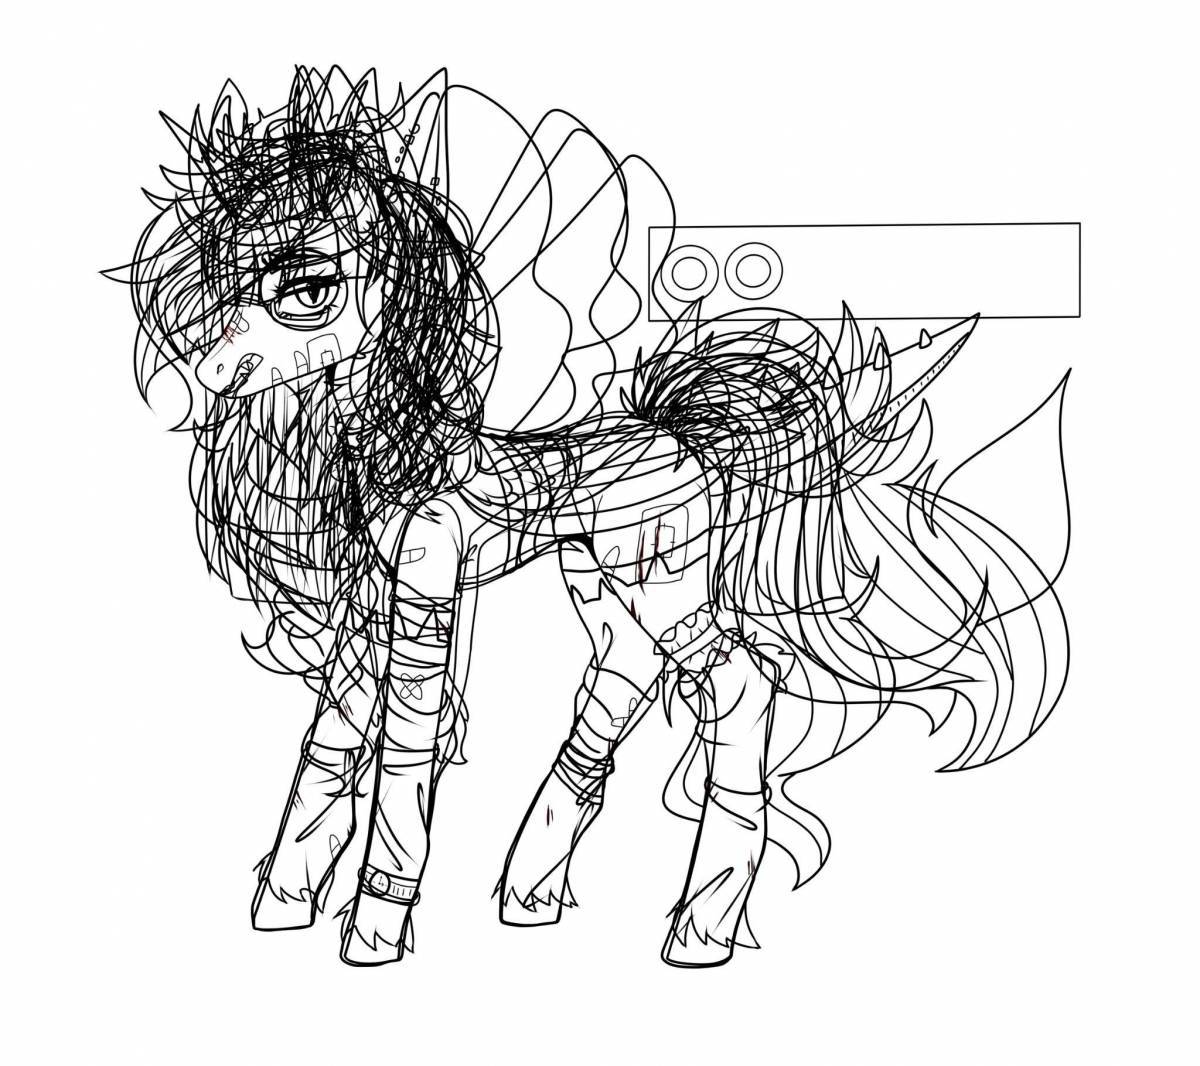 Blessed adopt me peta coloring page